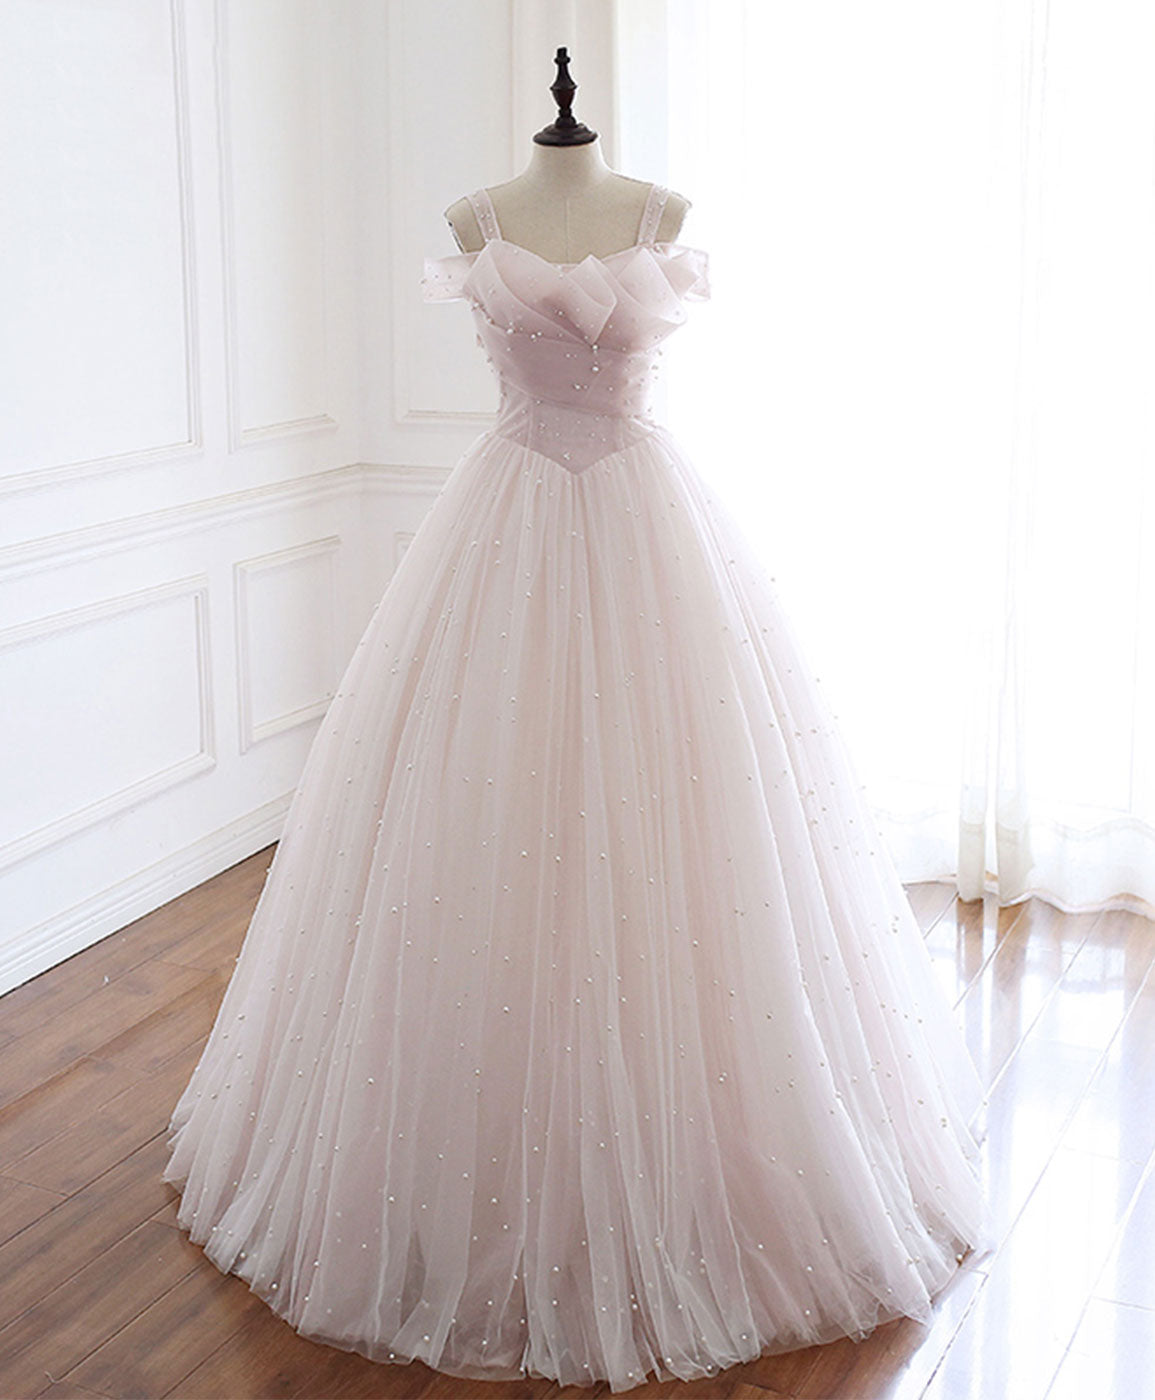 Light Pink Tulle Long Prom Dress Outfits For Women Pink Tulle Formal Graduation Dresses